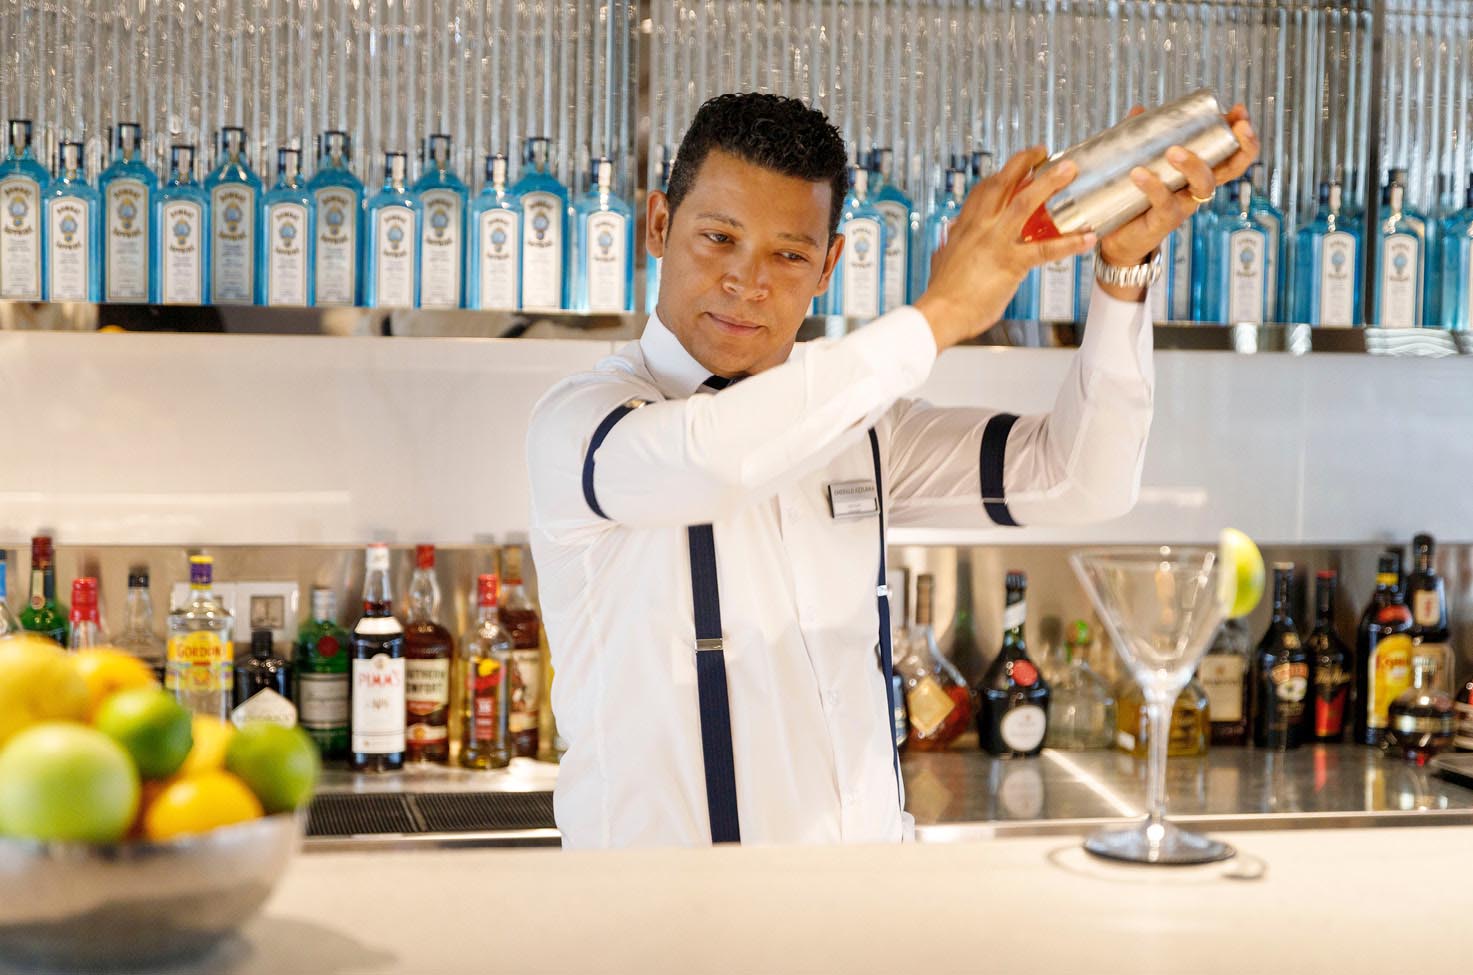 Waiter shaking up a cocktail in a mixer for a guest at the well-stocked bar of an Emerald Cruises luxury yacht cruise 